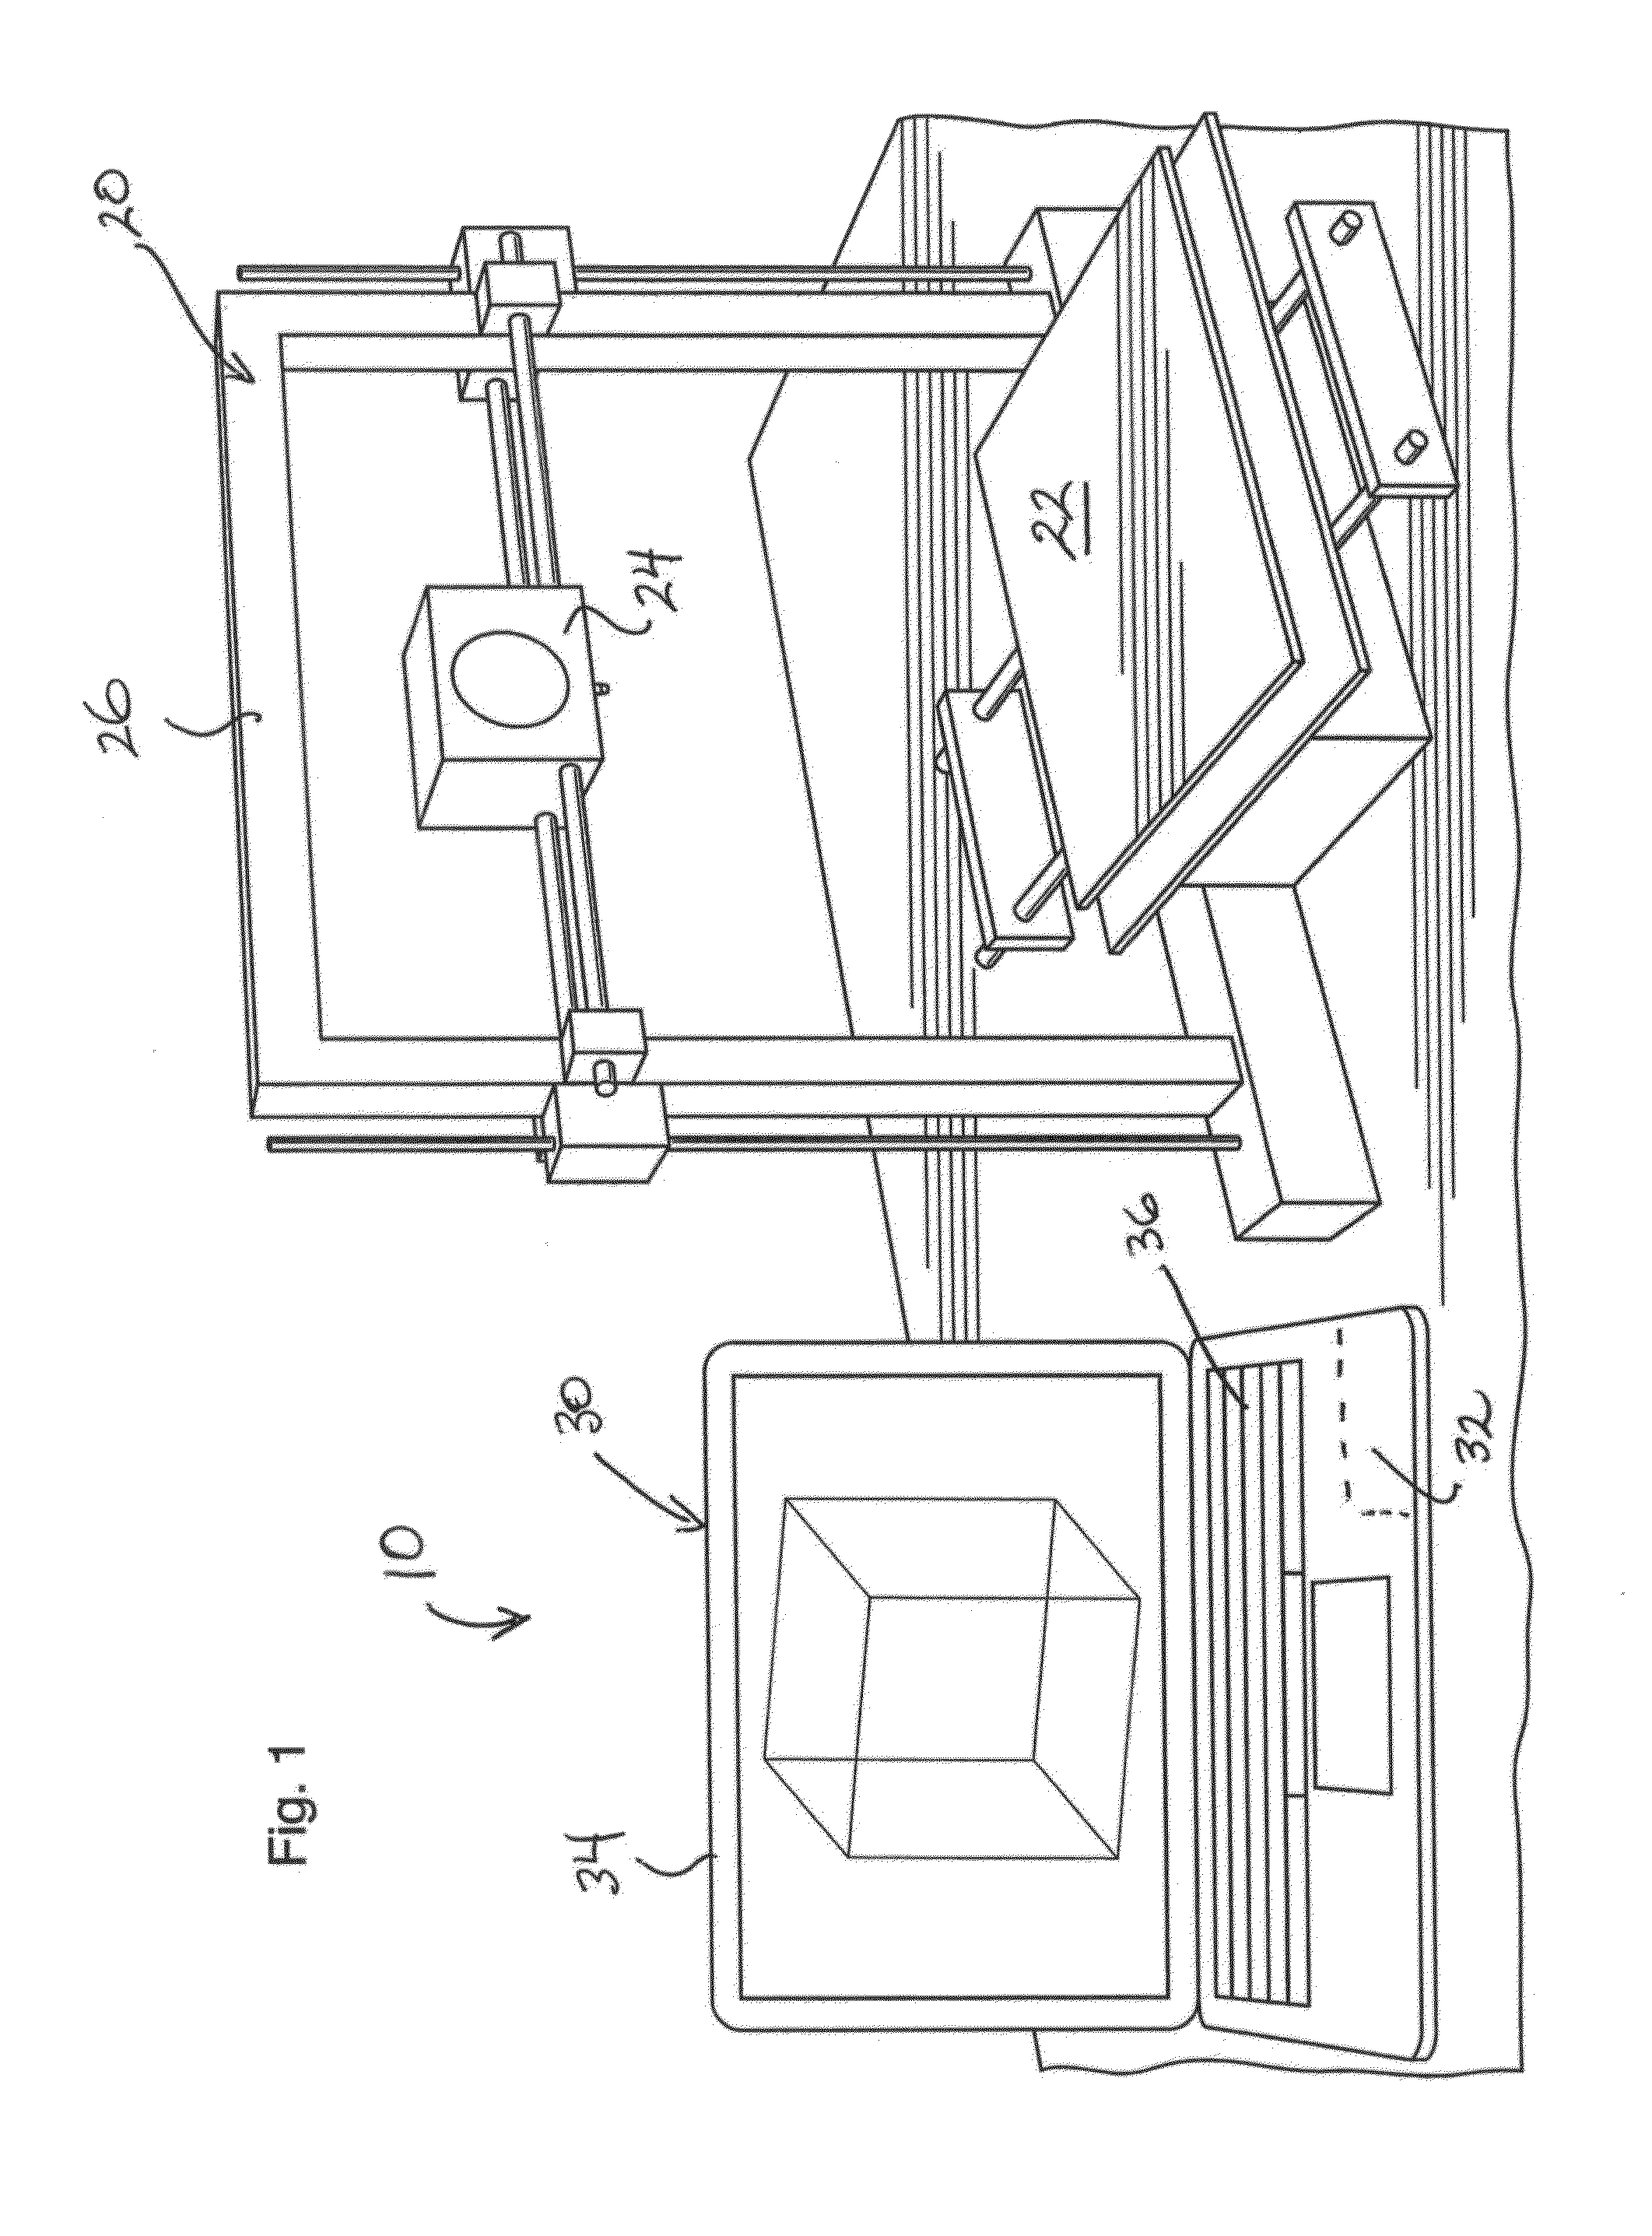 Method of Reducing and Optimising Printed Support Structures in 3D Printing Processes